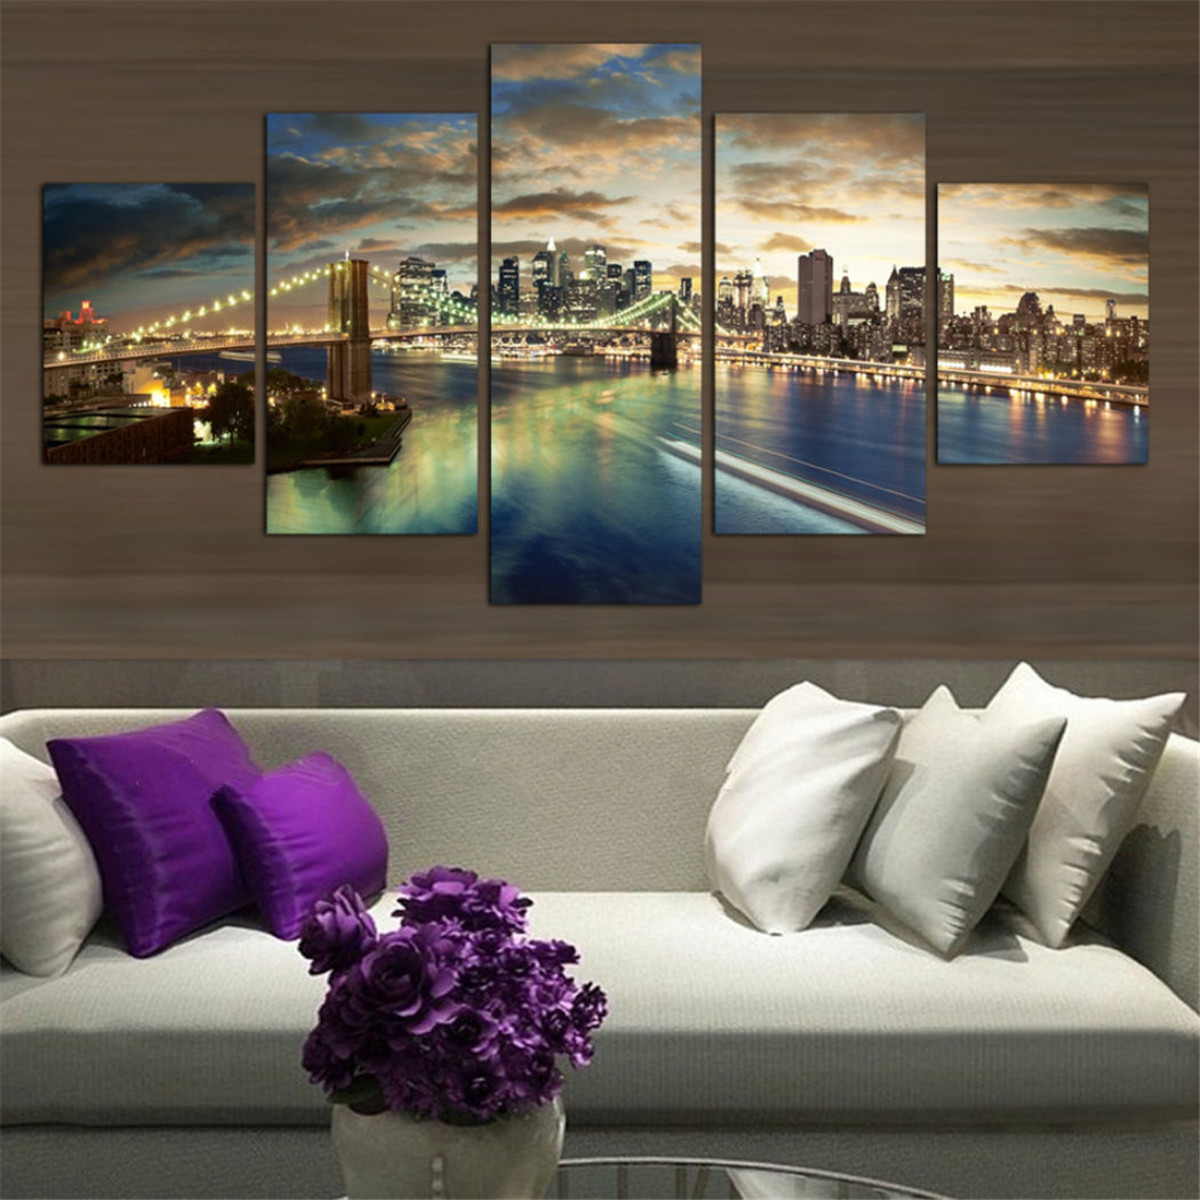 5 Pcs Wall Decorative Painting New York City at Night Wall Decor Art Pictures Canvas Prints Home Office Hotel Decorations